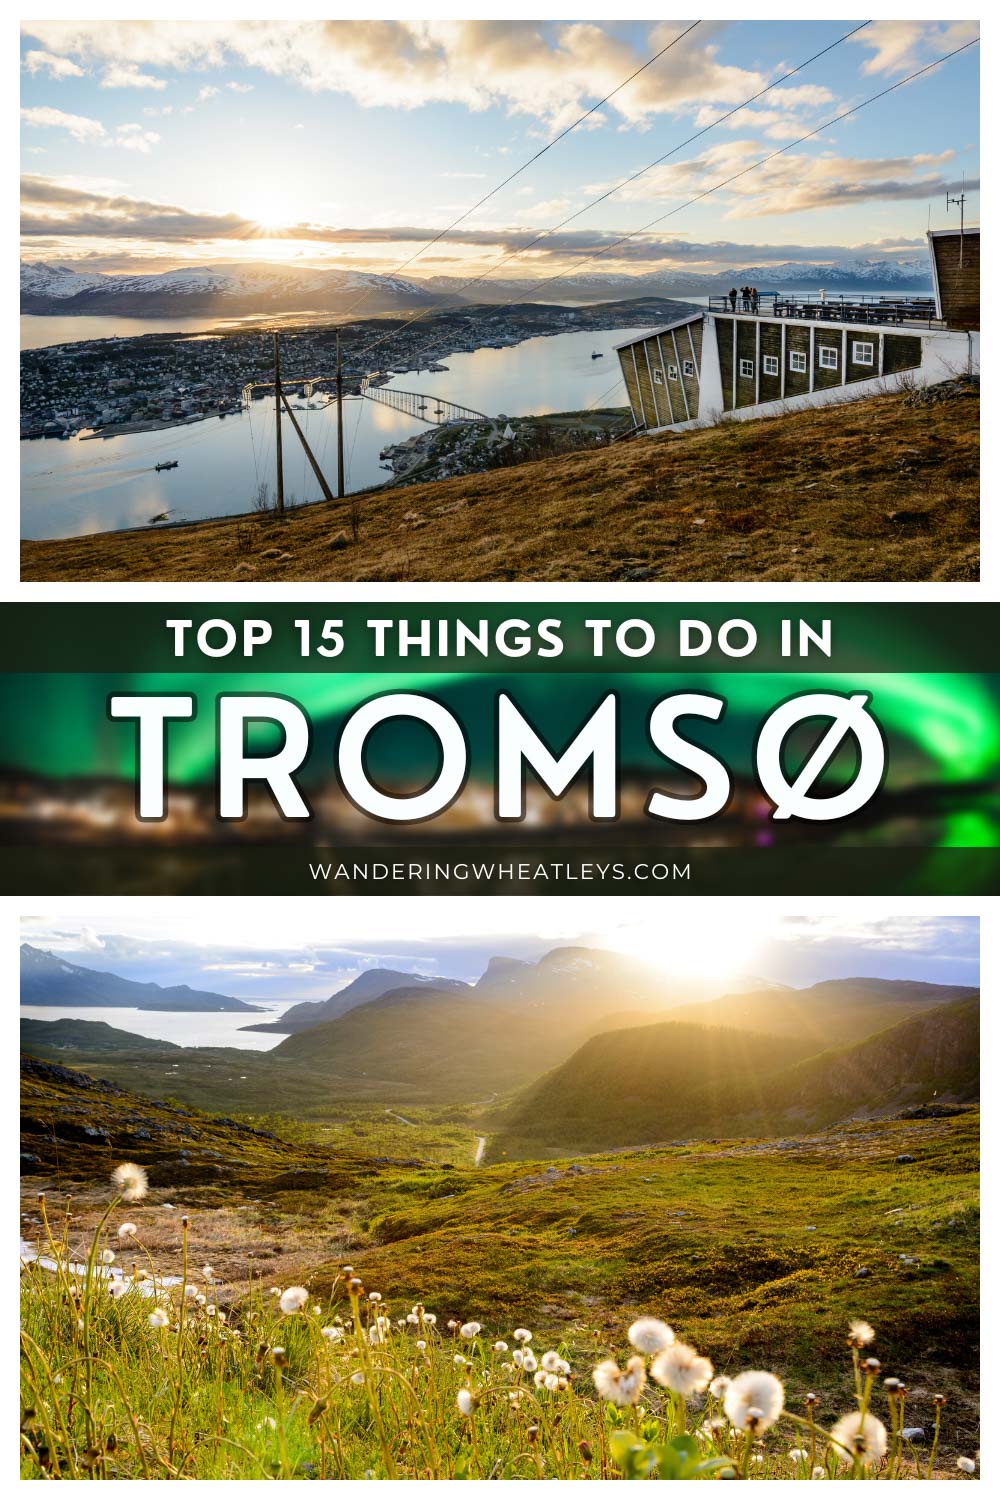 The Best Things to do in Tromso, Norway